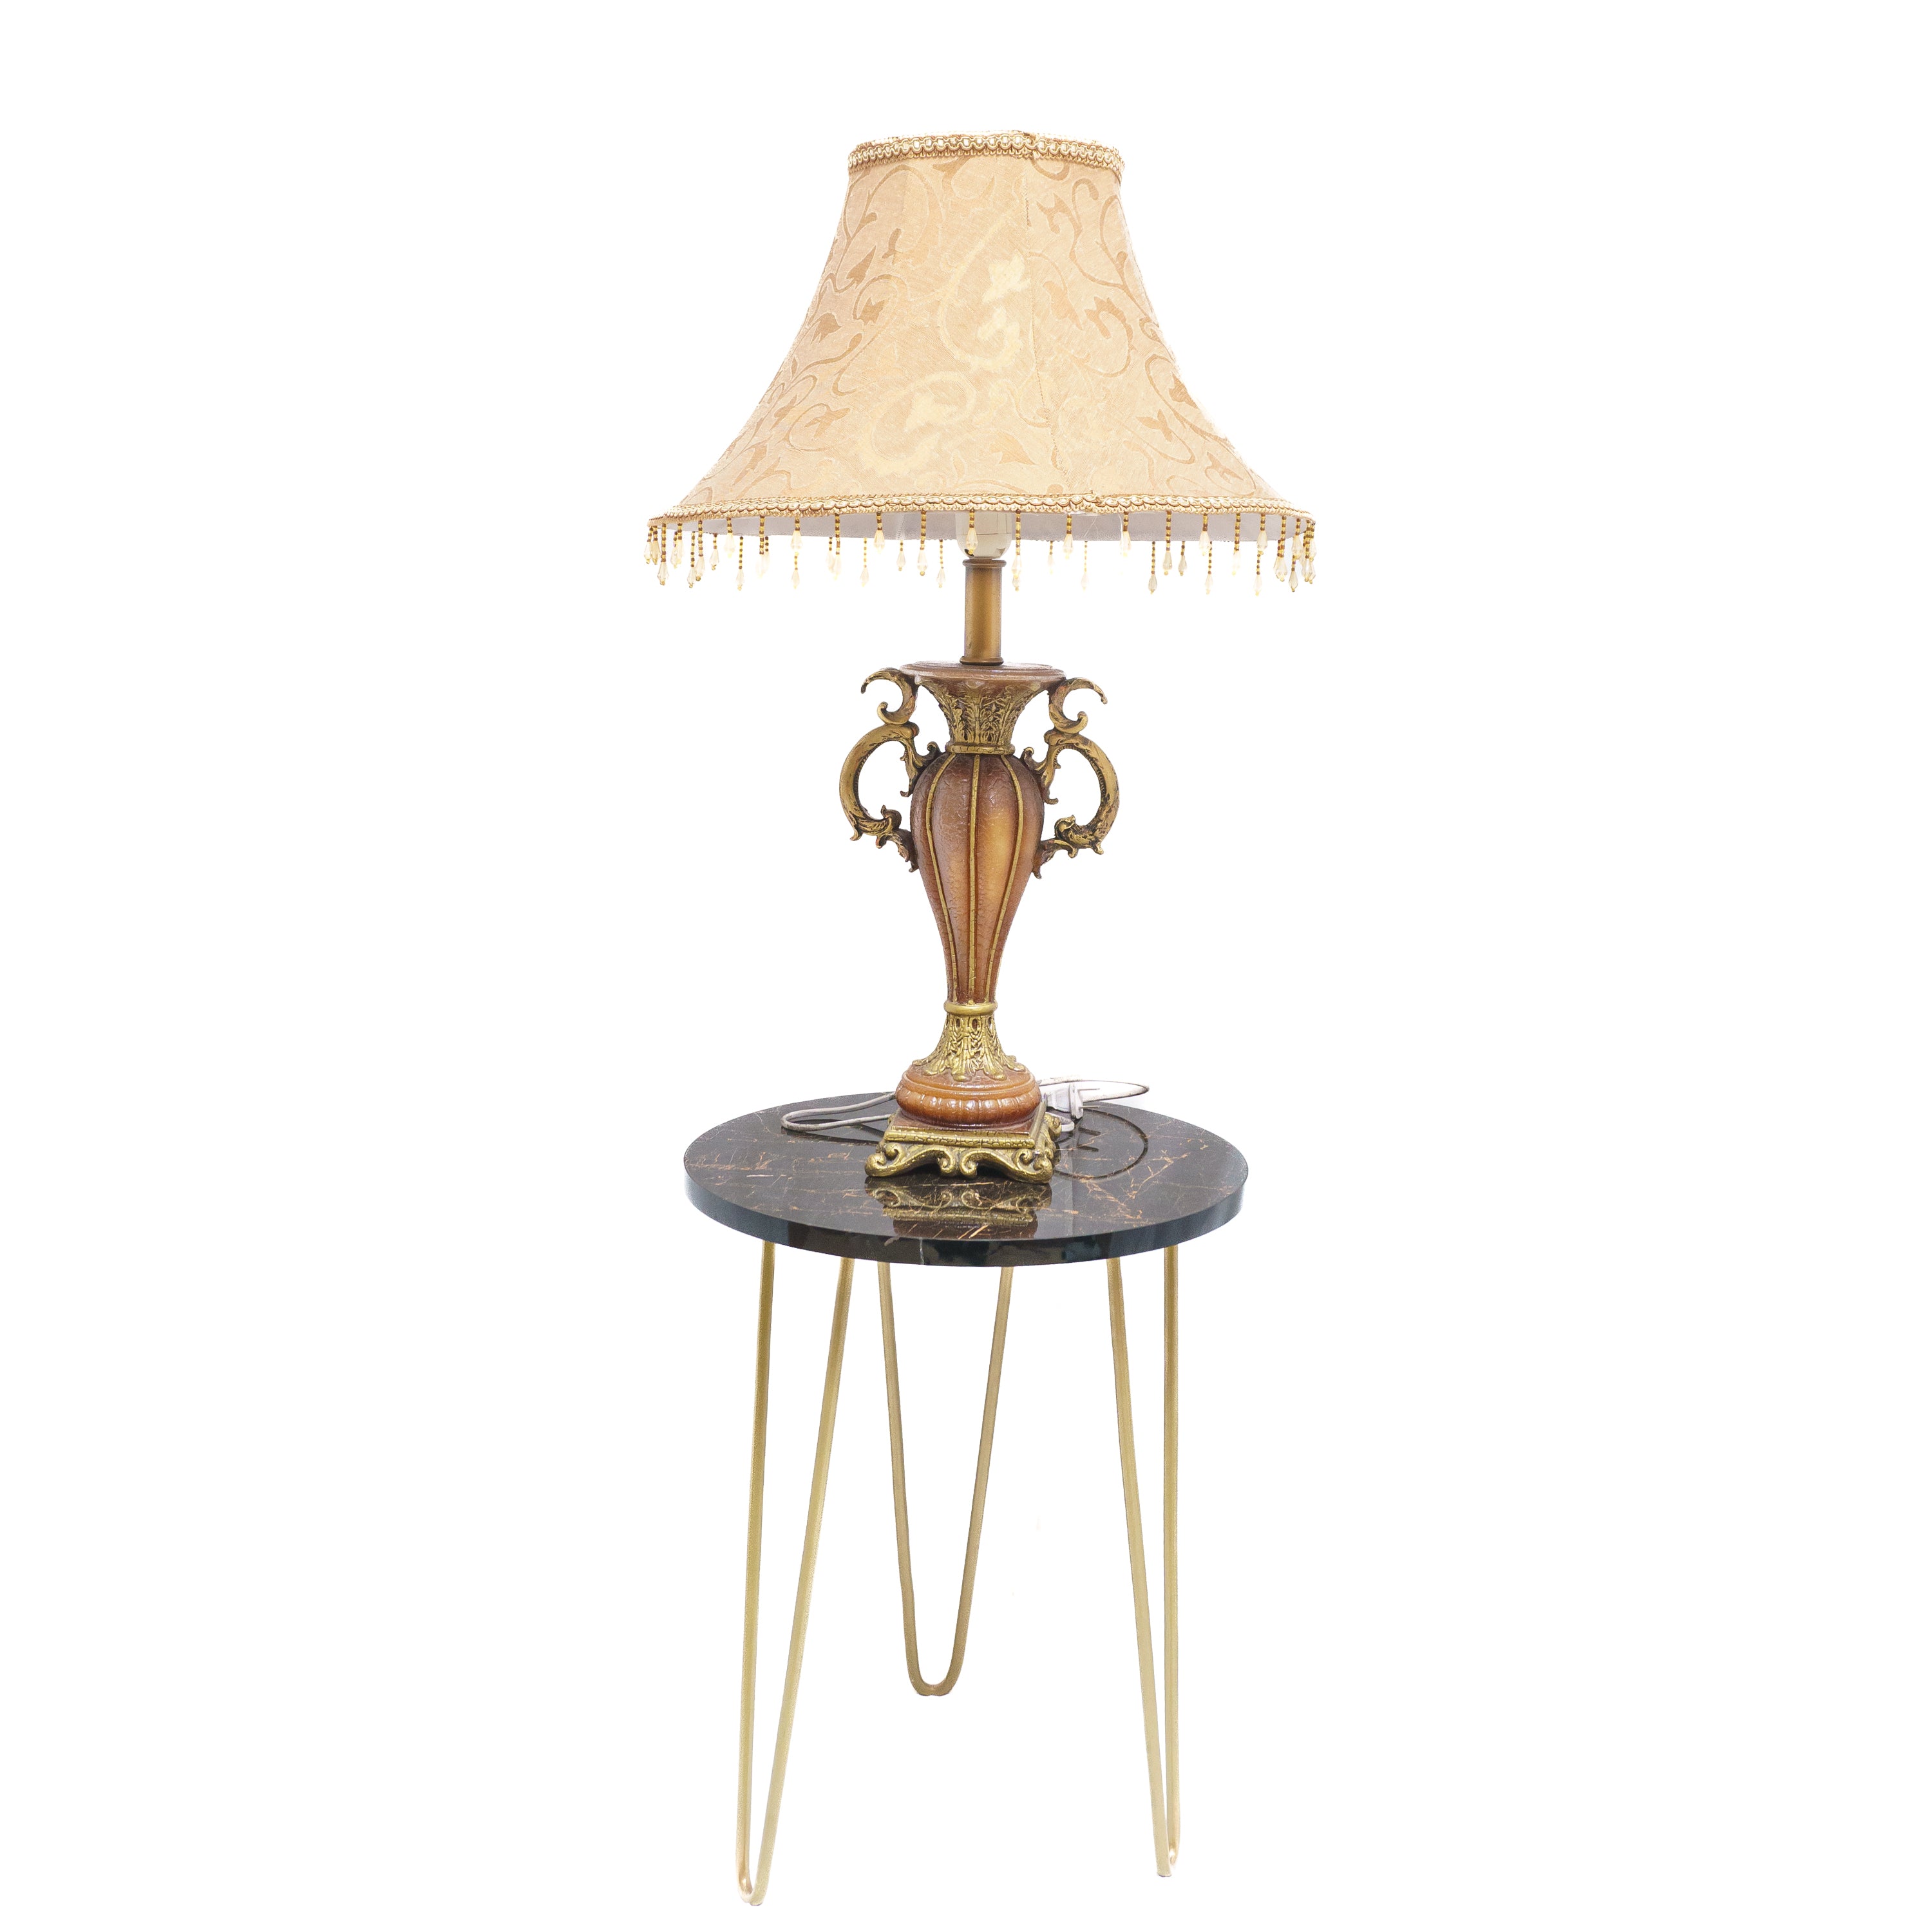 Royal Elegance Electric Table Lamp: Bell-Shaped Lamp Shade with Ornate Lamp Stand